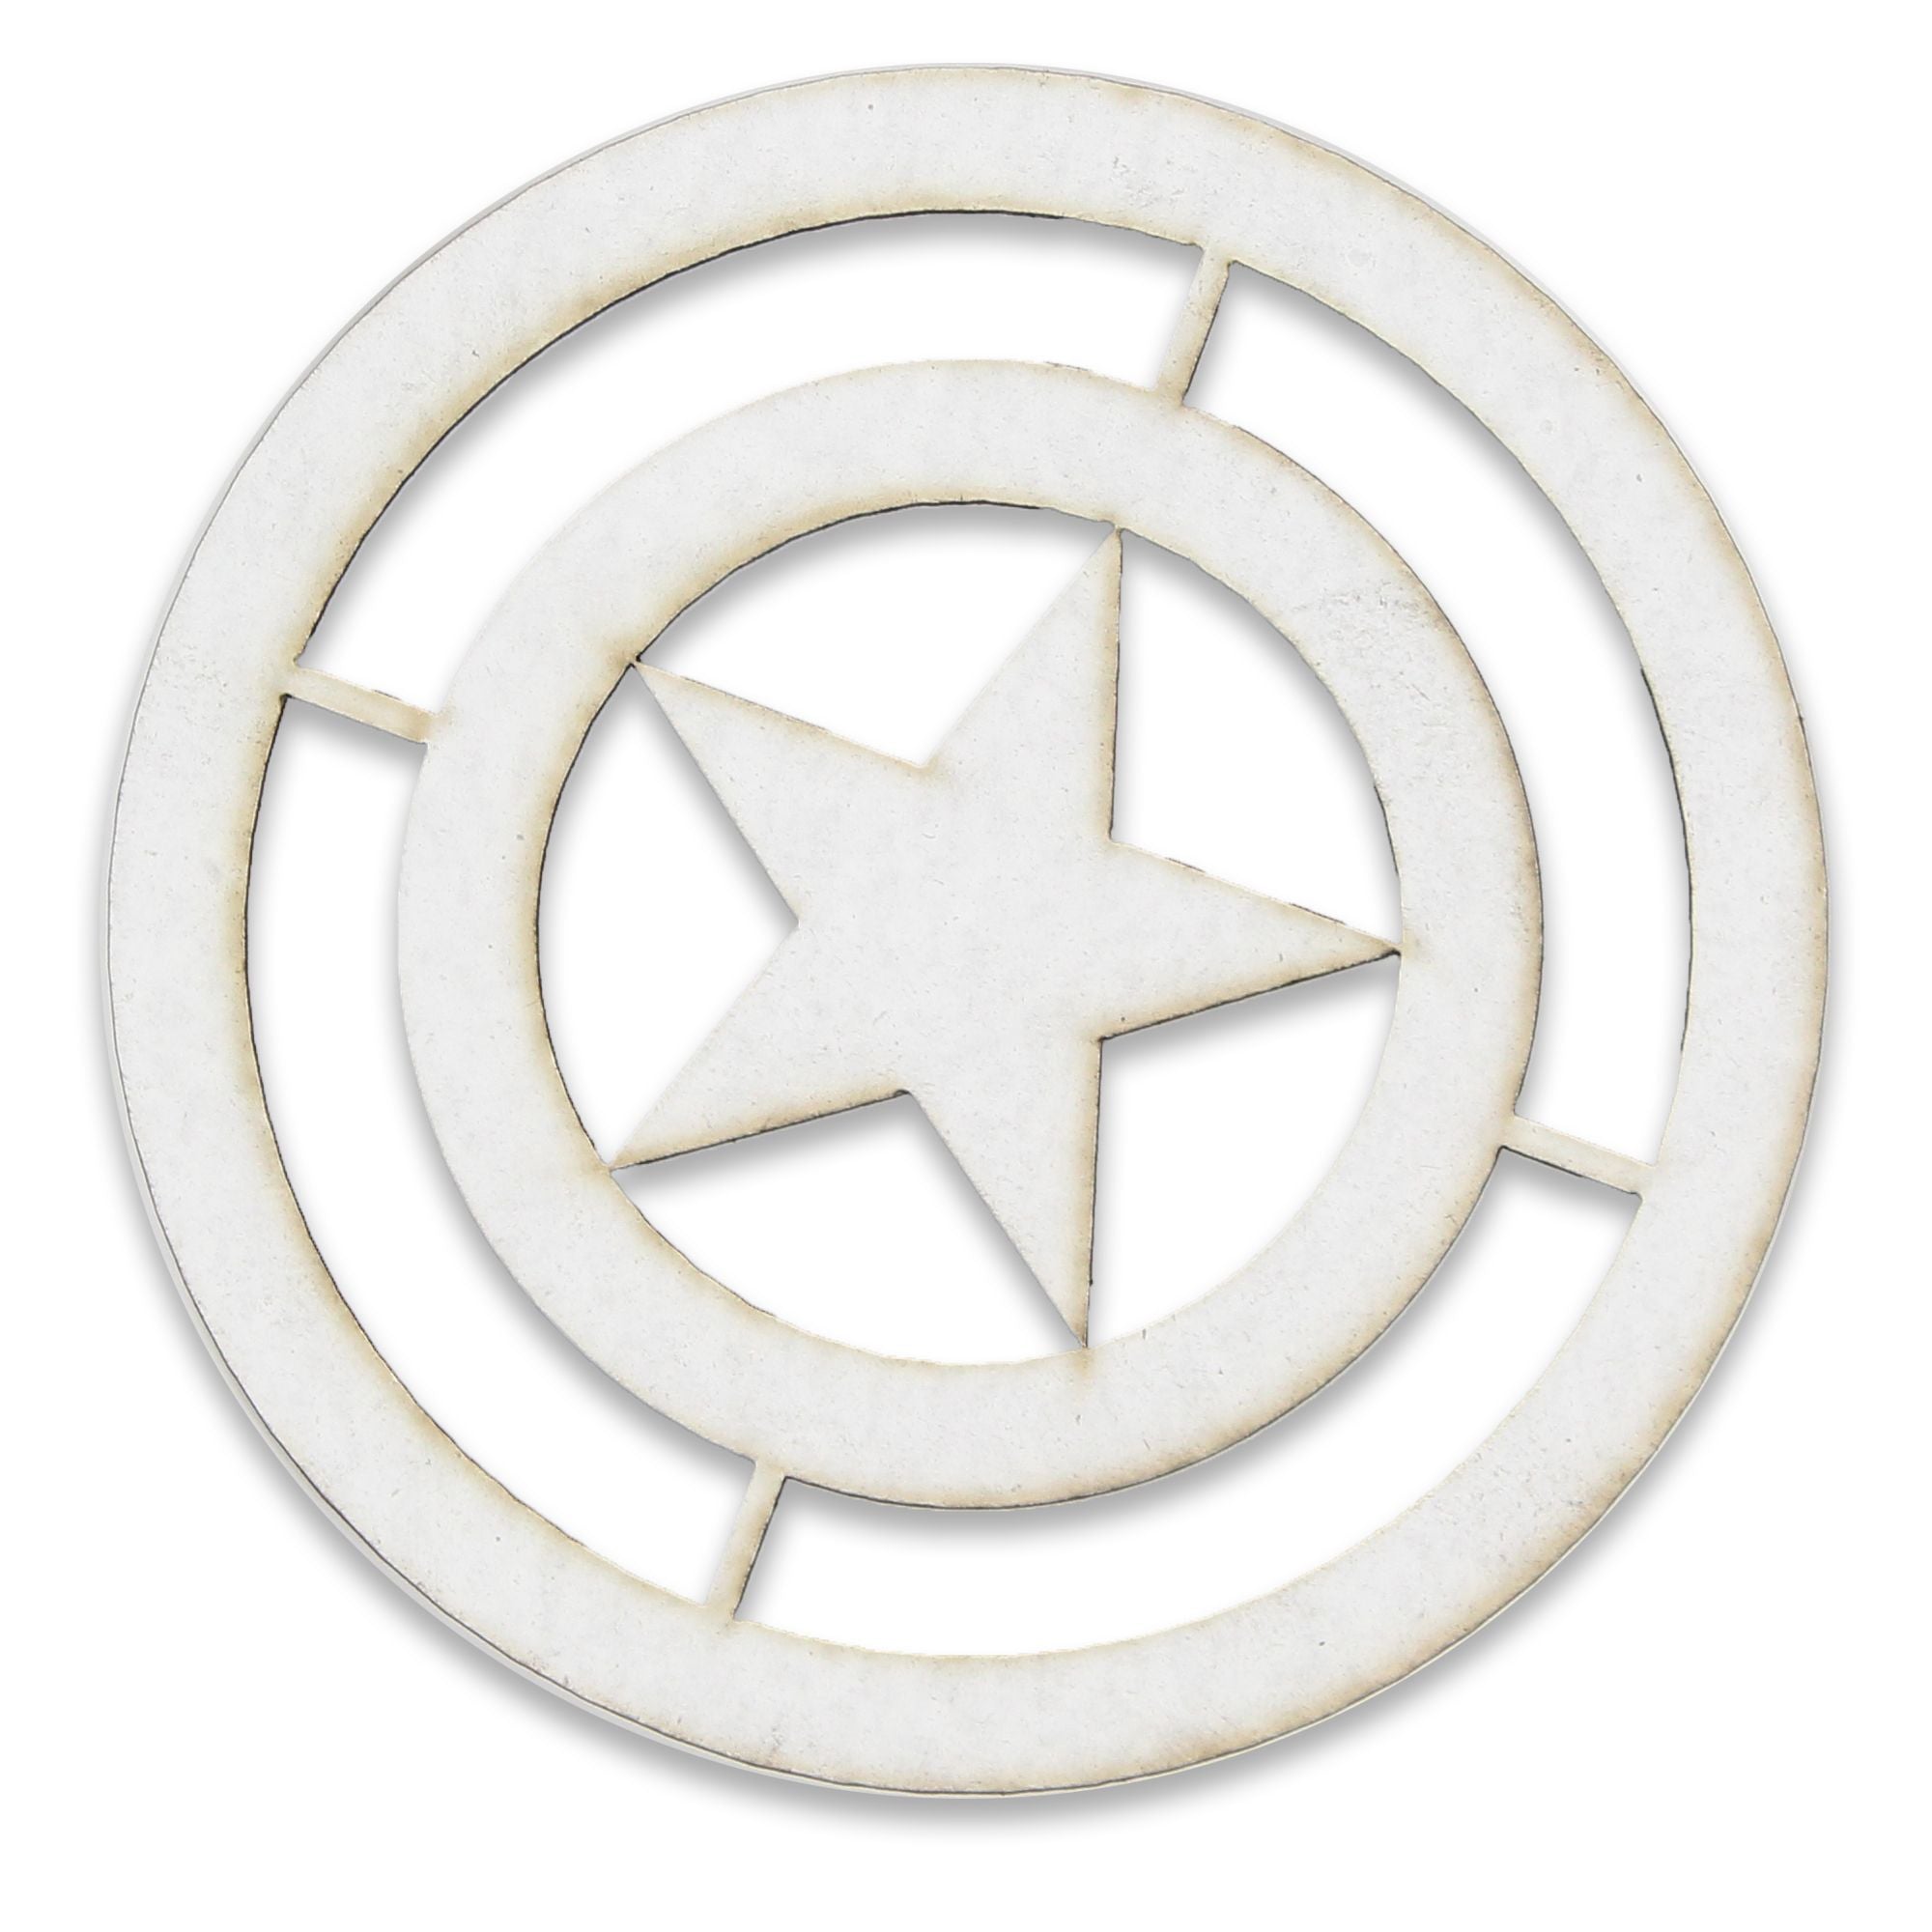 Primed Chipboard 1.5mm -Captain America's Shield, Approx 3.85 x 0.7in,1Pc